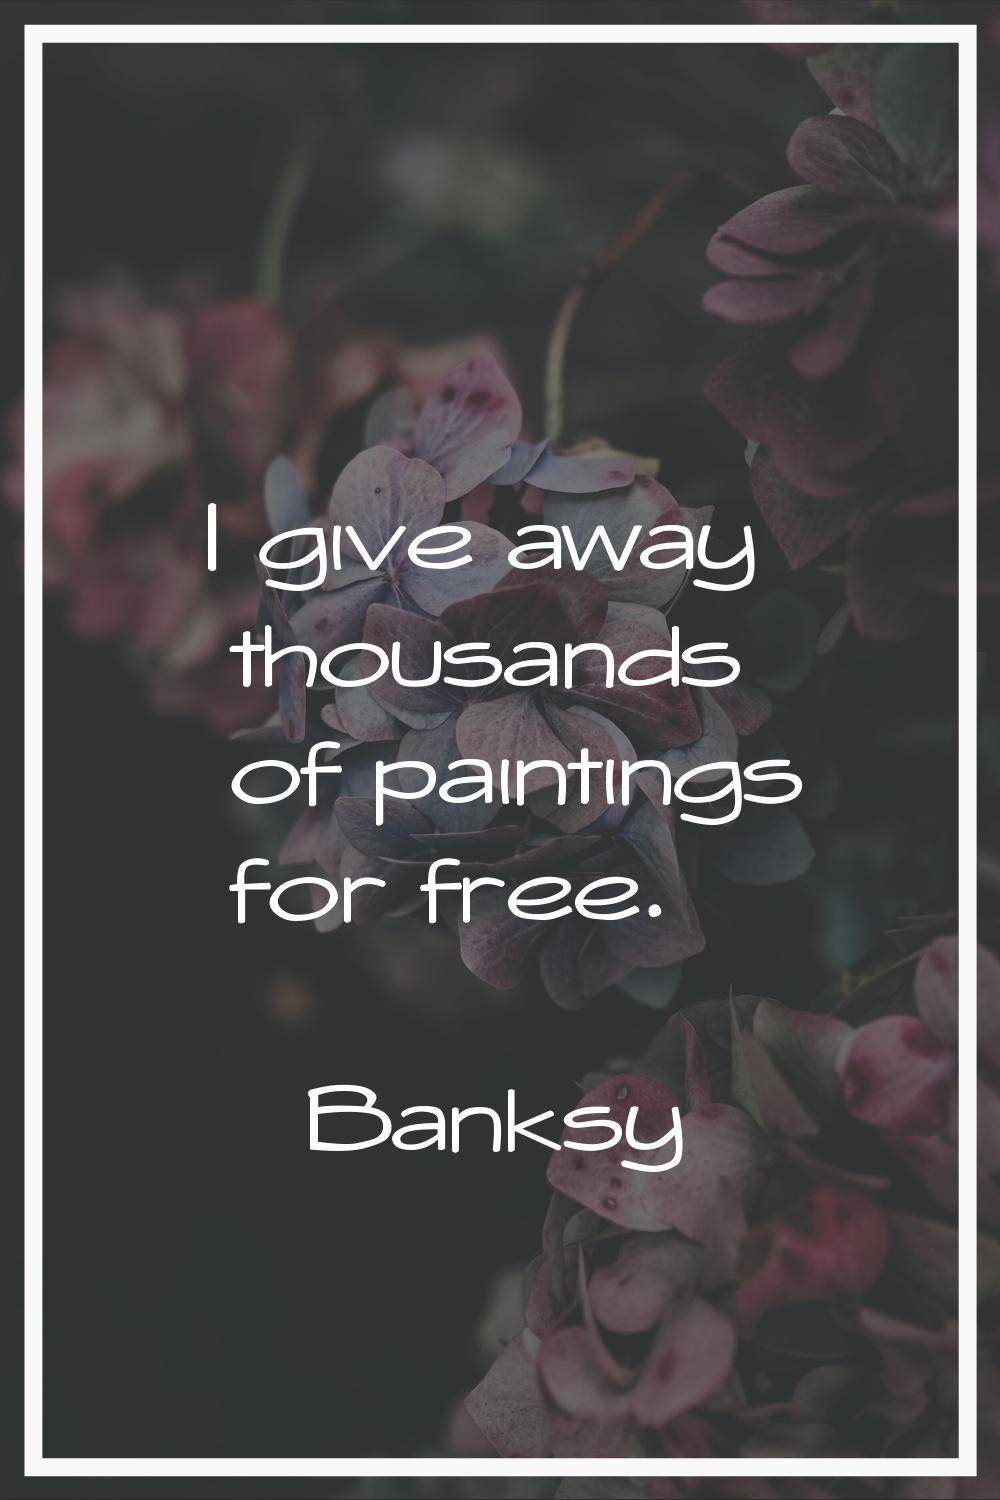 I give away thousands of paintings for free.